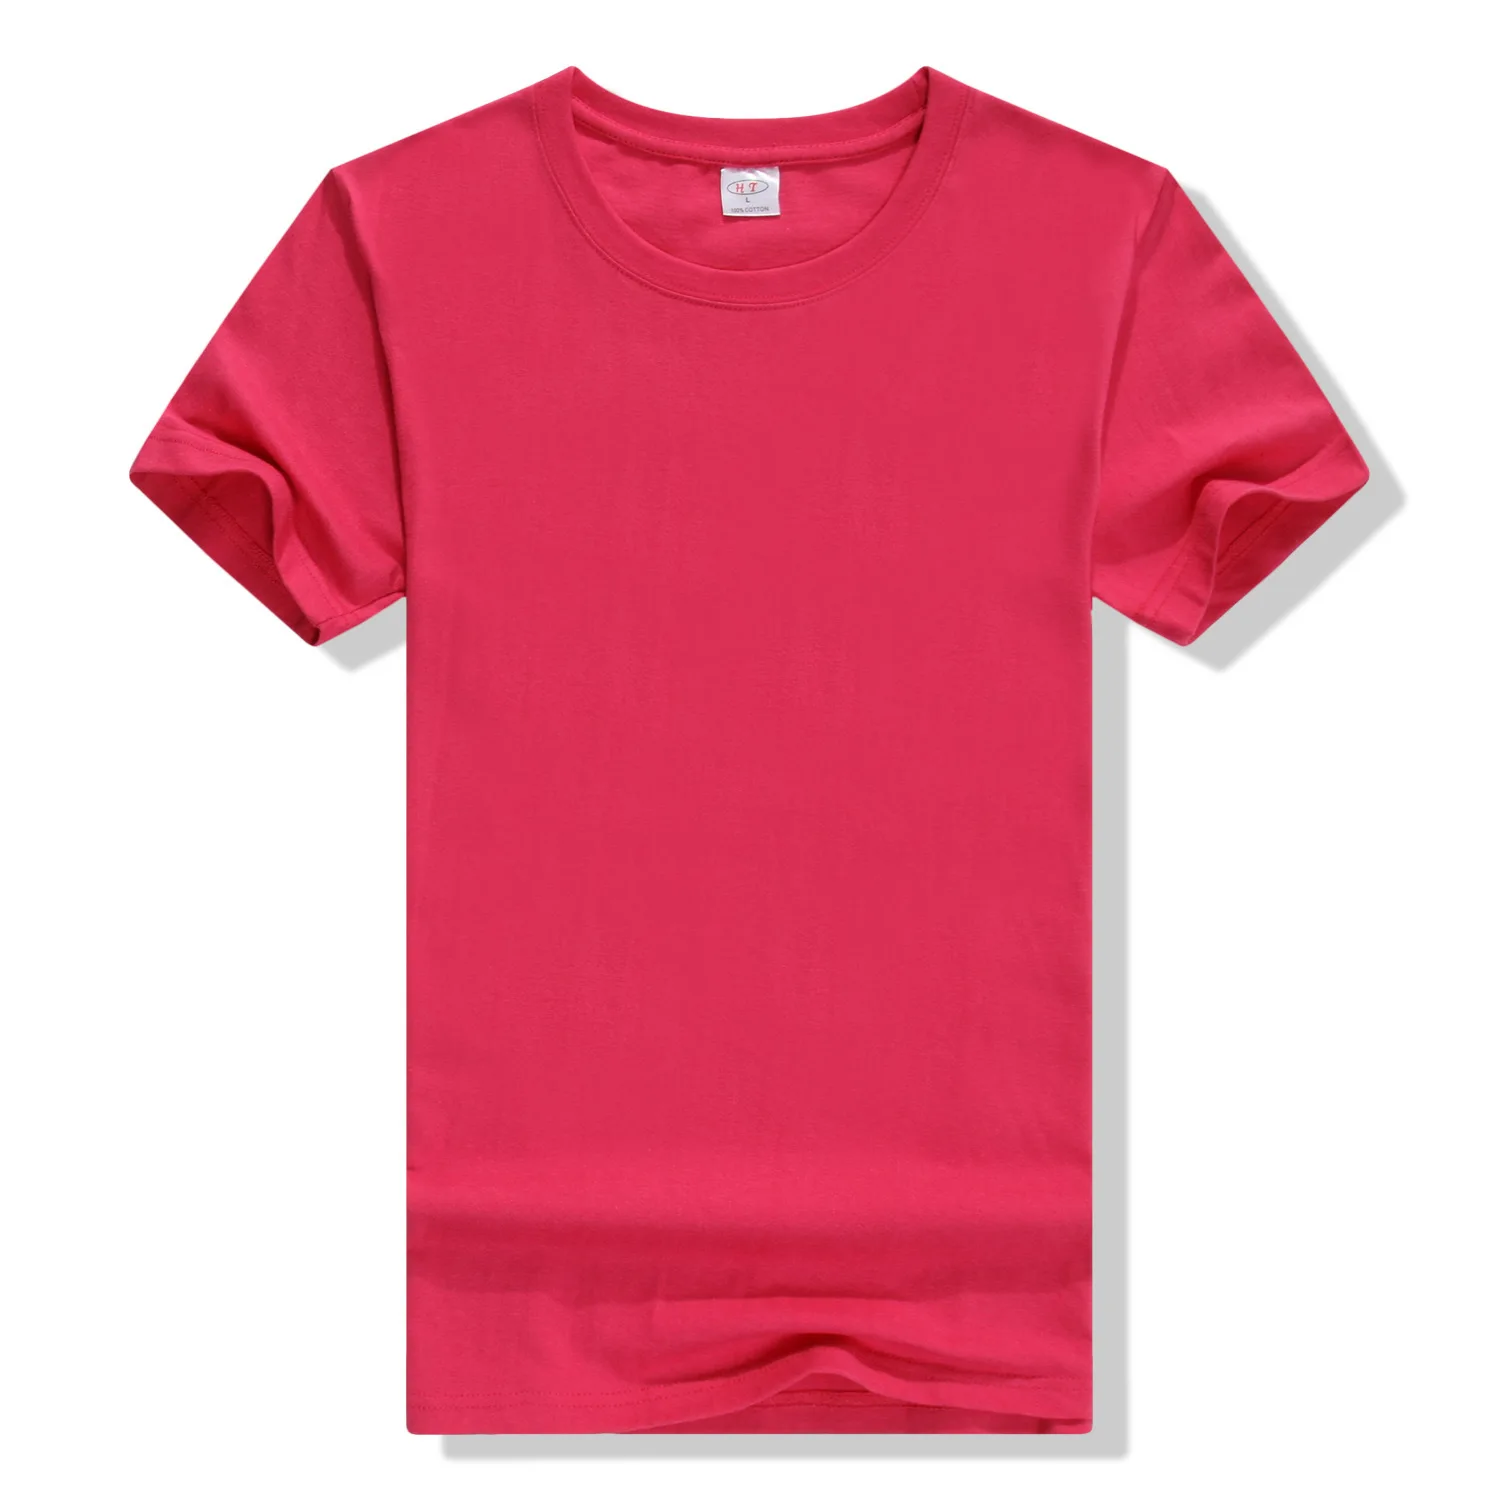 T-shirt 65% Polyester 35% Cotton - Buy T-shirt 65% Polyester 35% Cotton ...